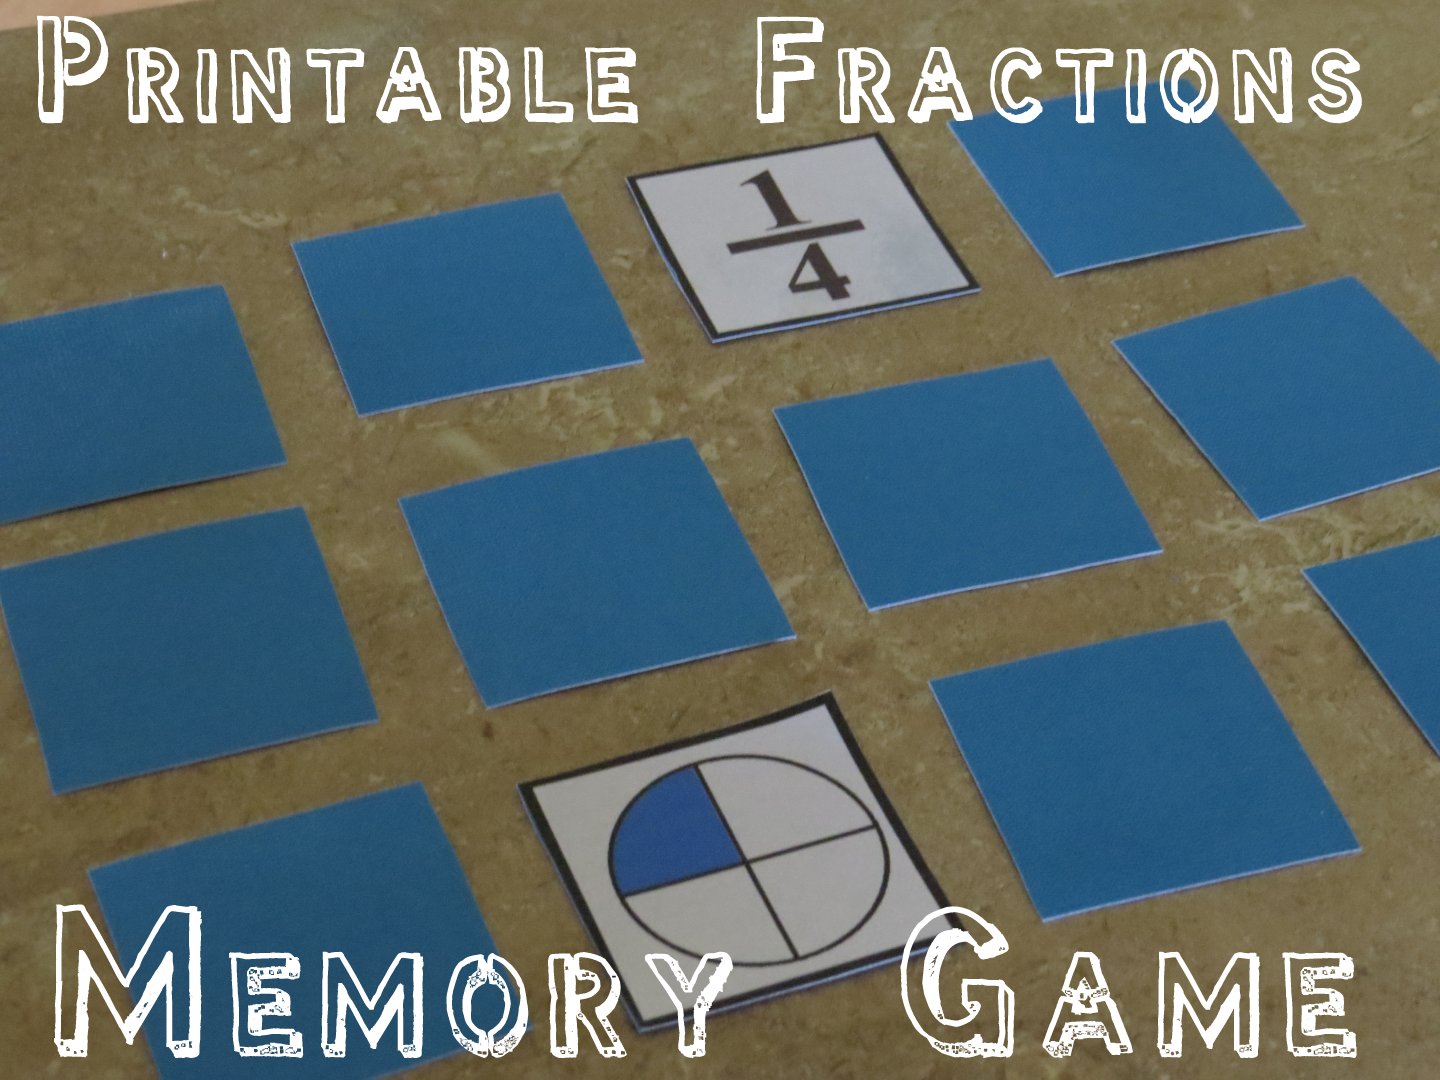 fraction-games-printable-memory-game-pieces